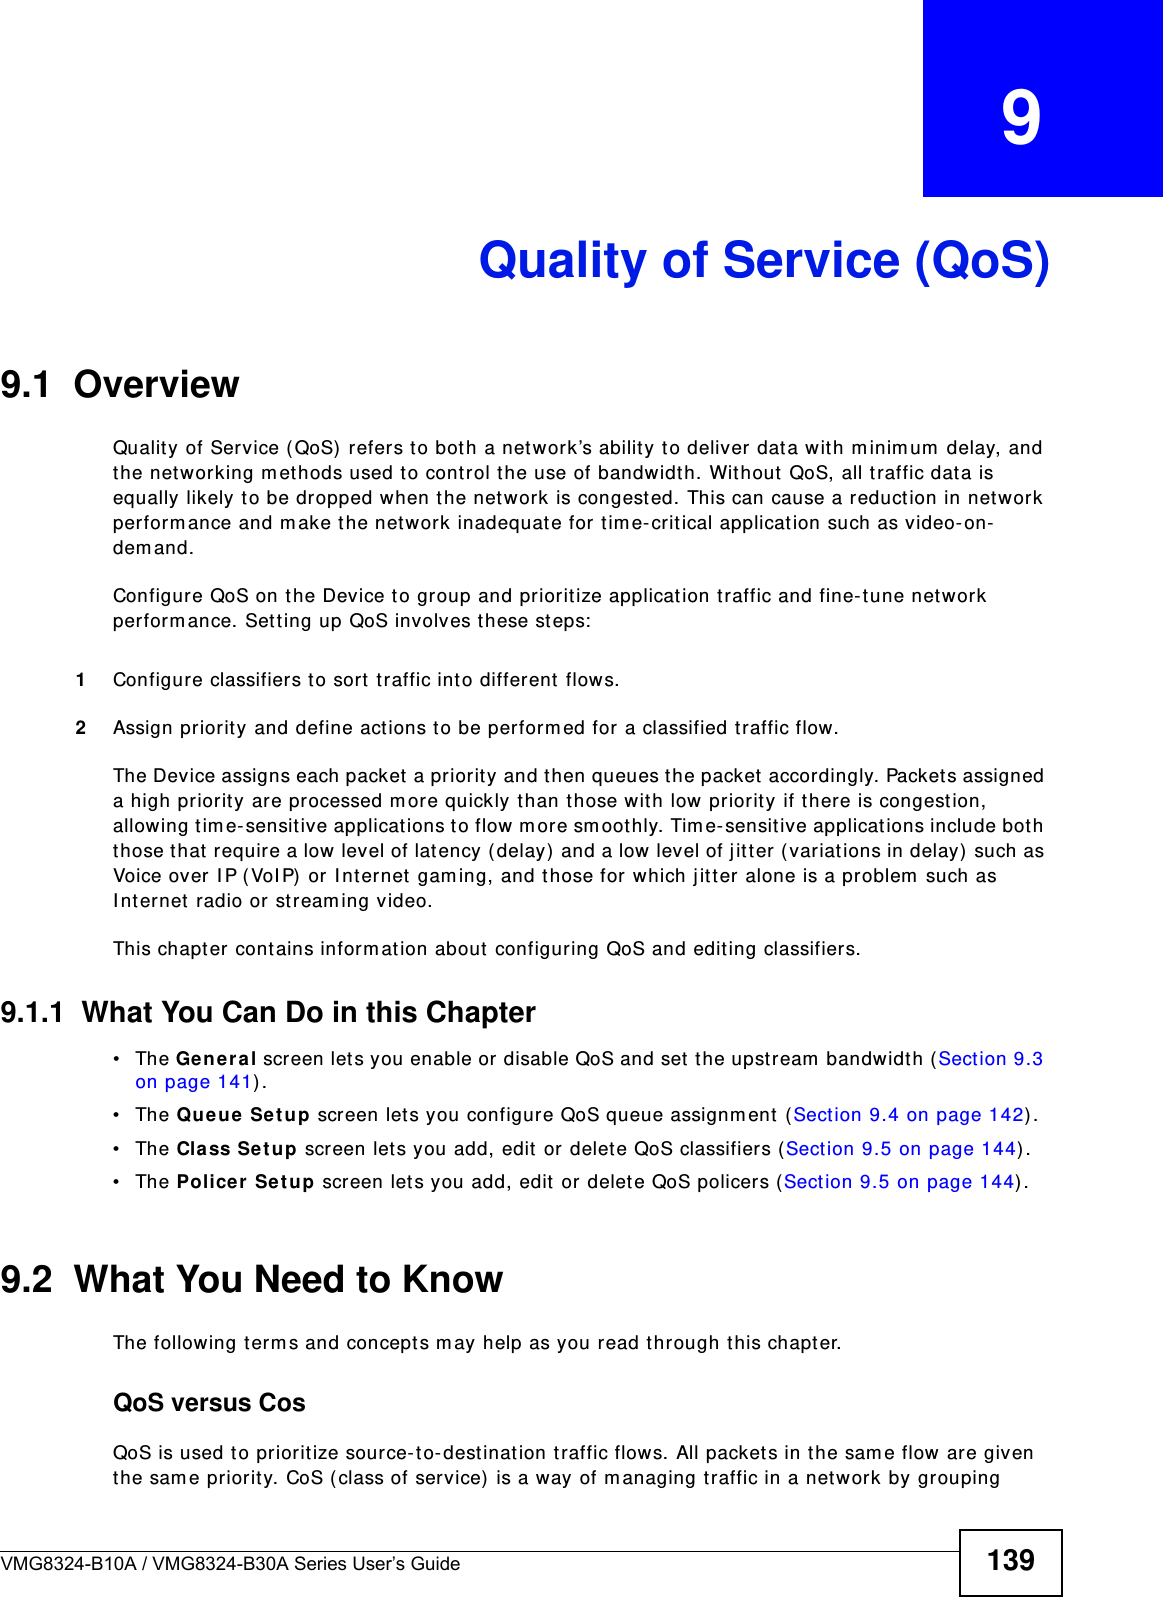 VMG8324-B10A / VMG8324-B30A Series User’s Guide 139CHAPTER   9Quality of Service (QoS)9.1  Overview Quality of Service (QoS)  refer s t o bot h a net work’s ability to deliver dat a wit h m inim um  delay, and the net working m et hods used t o control t he use of bandwidt h. Wit hout  QoS, all traffic dat a is equally likely t o be dropped when t he network is congest ed. This can cause a reduct ion in net w ork perform ance and m ake t he network inadequat e for  t im e- critical applicat ion such as video- on-dem and.Configure QoS on t he Device to group and prioritize applicat ion t raffic and fine-t une net work perform ance. Set t ing up QoS involves t hese st eps:1Configure classifiers t o sort  traffic int o different  flows. 2Assign priority and define act ions t o be perform ed for a classified traffic flow. The Device assigns each packet a priority and t hen queues t he packet accordingly. Packet s assigned a high priority are processed m ore quickly t han t hose with low priorit y if t here is congest ion, allowing t im e- sensit ive applicat ions t o flow m ore sm oot hly. Tim e- sensit ive applicat ions include both those that require a low level of lat ency ( delay)  and a low level of j it t er ( variat ions in delay)  such as Voice over I P ( VoI P) or I nt ernet gam ing, and those for which j itt er alone is a problem  such as I nt ernet  radio or st ream ing video.This chapt er contains inform at ion about  configuring QoS and editing classifiers.9.1.1  What You Can Do in this Chapter• The Genera l screen lets you enable or disable QoS and set t he upst ream  bandwidt h ( Sect ion 9.3 on page 141) .• The Qu e u e  Se t up screen let s you configure QoS queue assignm ent  (Sect ion 9.4 on page 142) .• The Cla ss Se t u p scr een lets you add, edit or delet e QoS classifiers (Sect ion 9.5 on page 144) .• The Policer  Se t u p screen lets you add, edit  or delet e QoS policers (Section 9.5 on page 144) .9.2  What You Need to KnowThe following t erm s and concept s m ay help as you read through t his chapt er.QoS versus CosQoS is used to prioritize source-t o- dest ination t raffic flows. All packet s in t he sam e flow are given the sam e priorit y. CoS ( class of service)  is a way of m anaging traffic in a network by grouping 